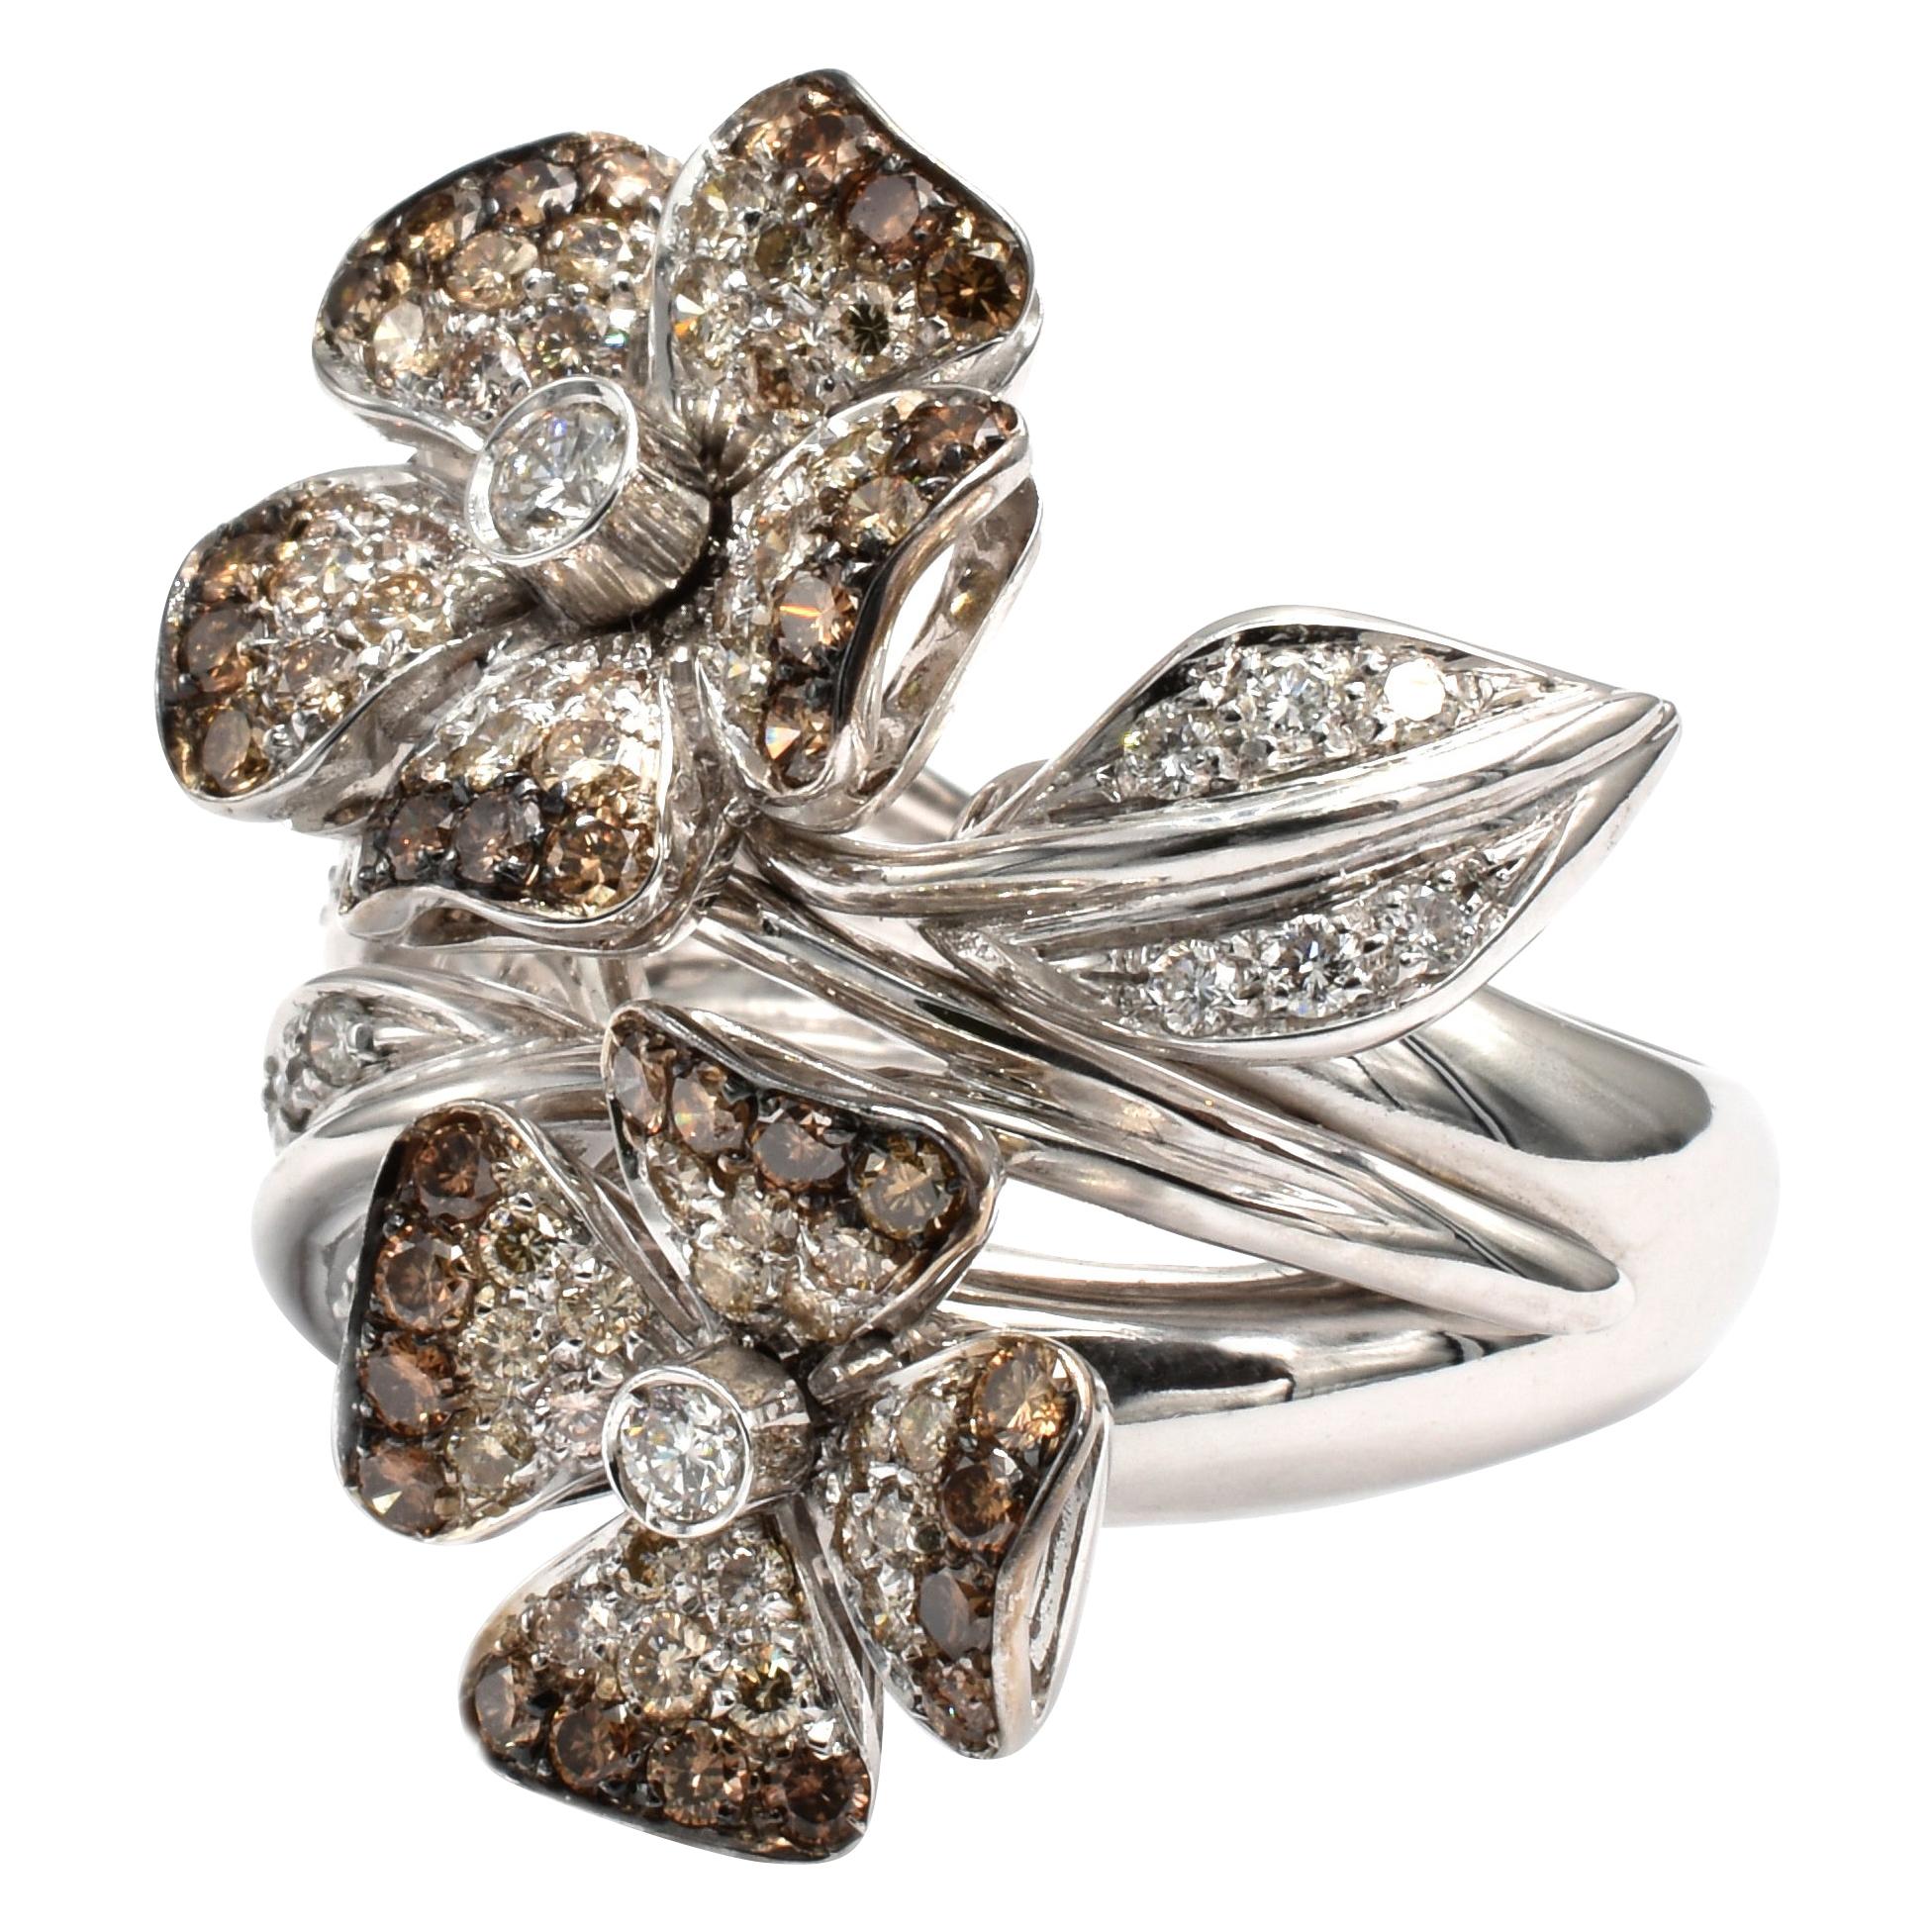 White and Champagne Diamonds Flower Gold Ring Made in Italy